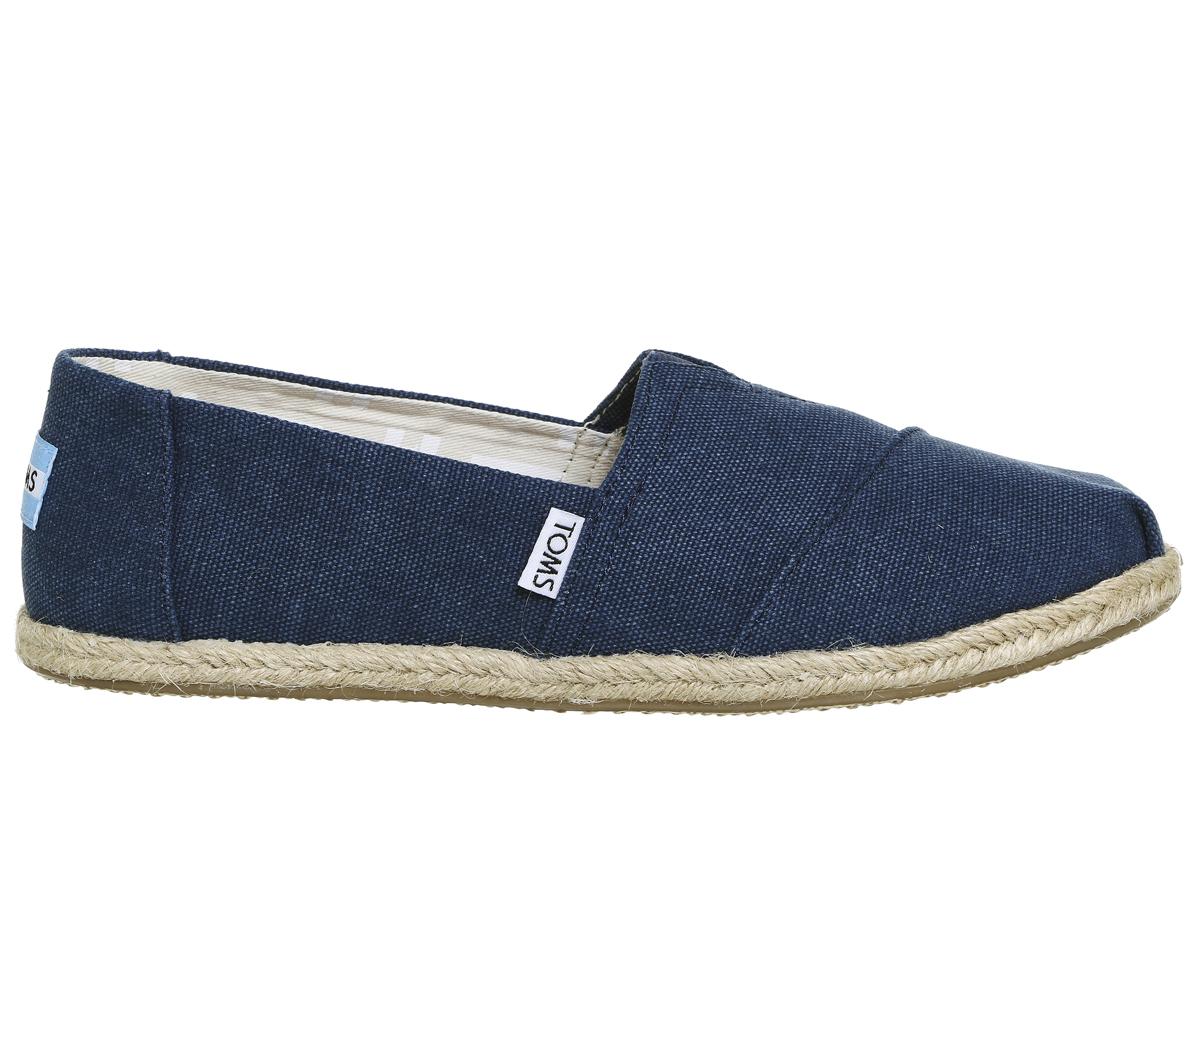 TOMS Seasonal Classic Slip On Washed Navy Canvas Rope Sole - Flat Shoes ...